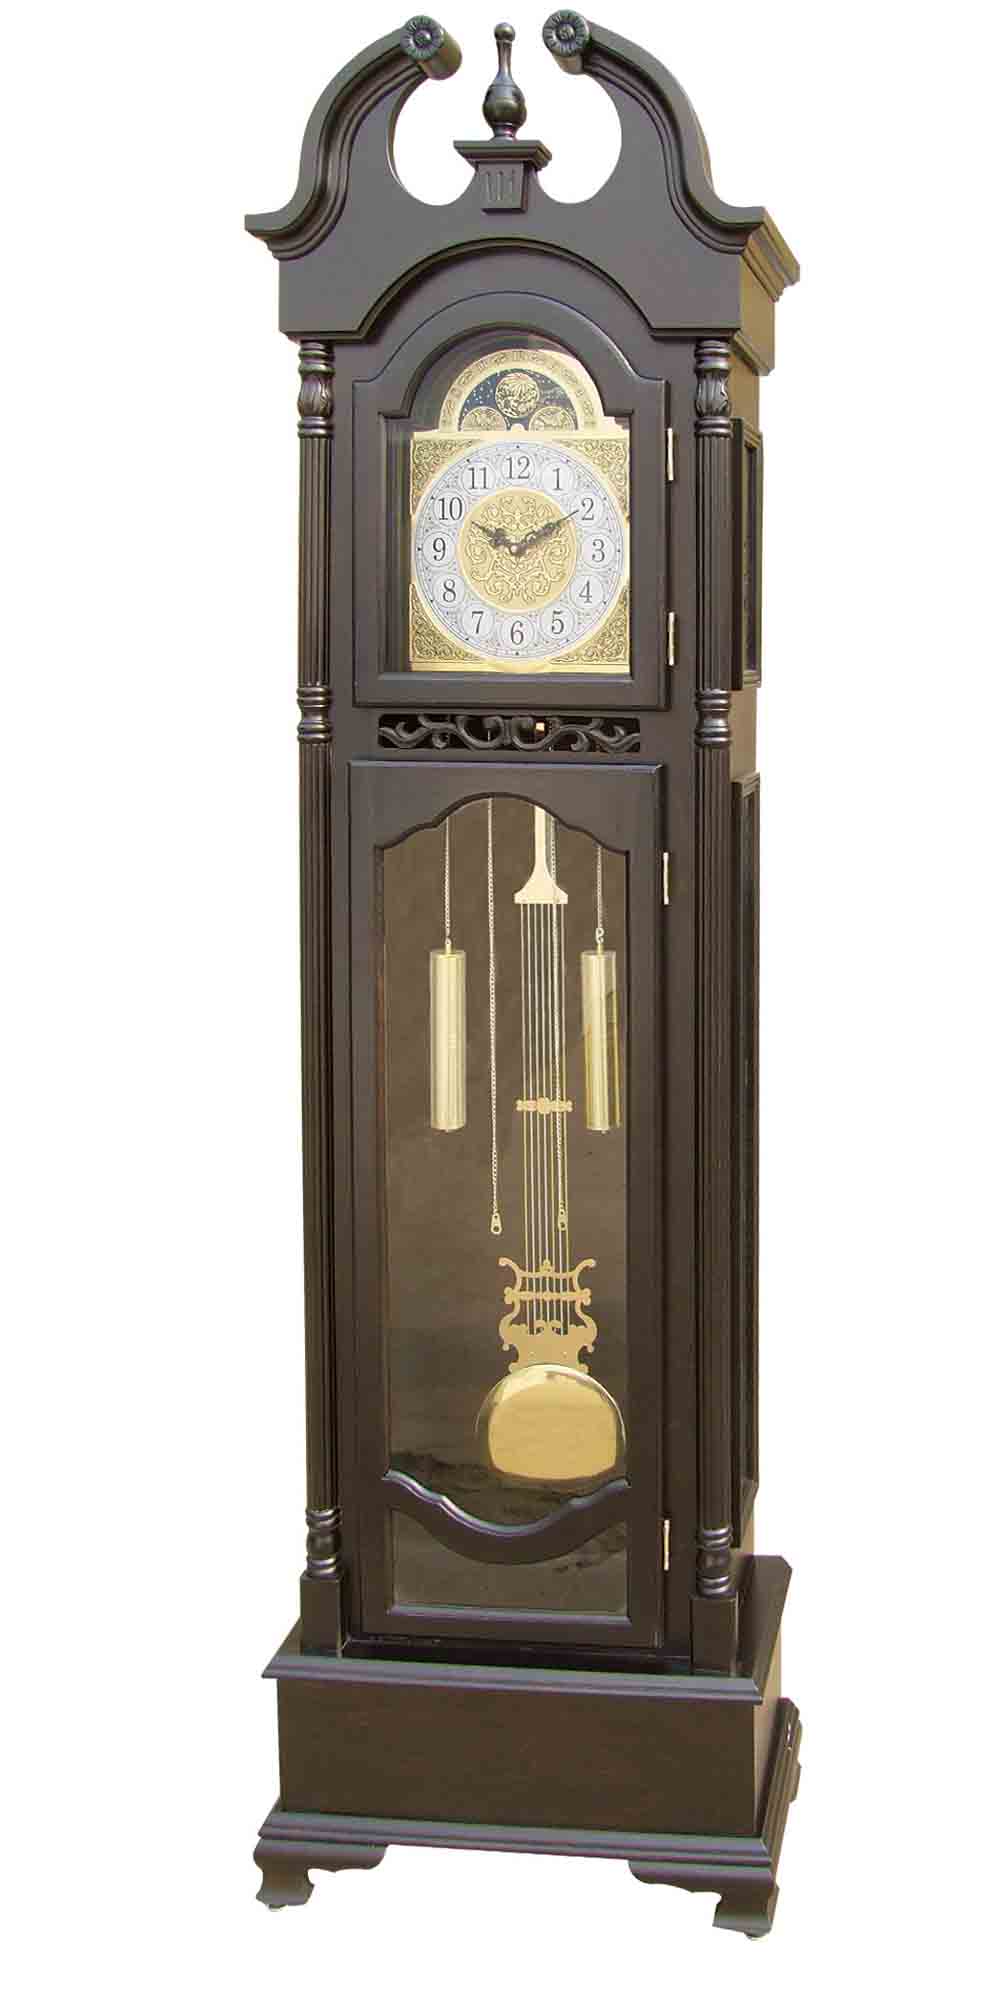 Yg008 Clocks For Sale Customelized Clock Chem Productions For Sale